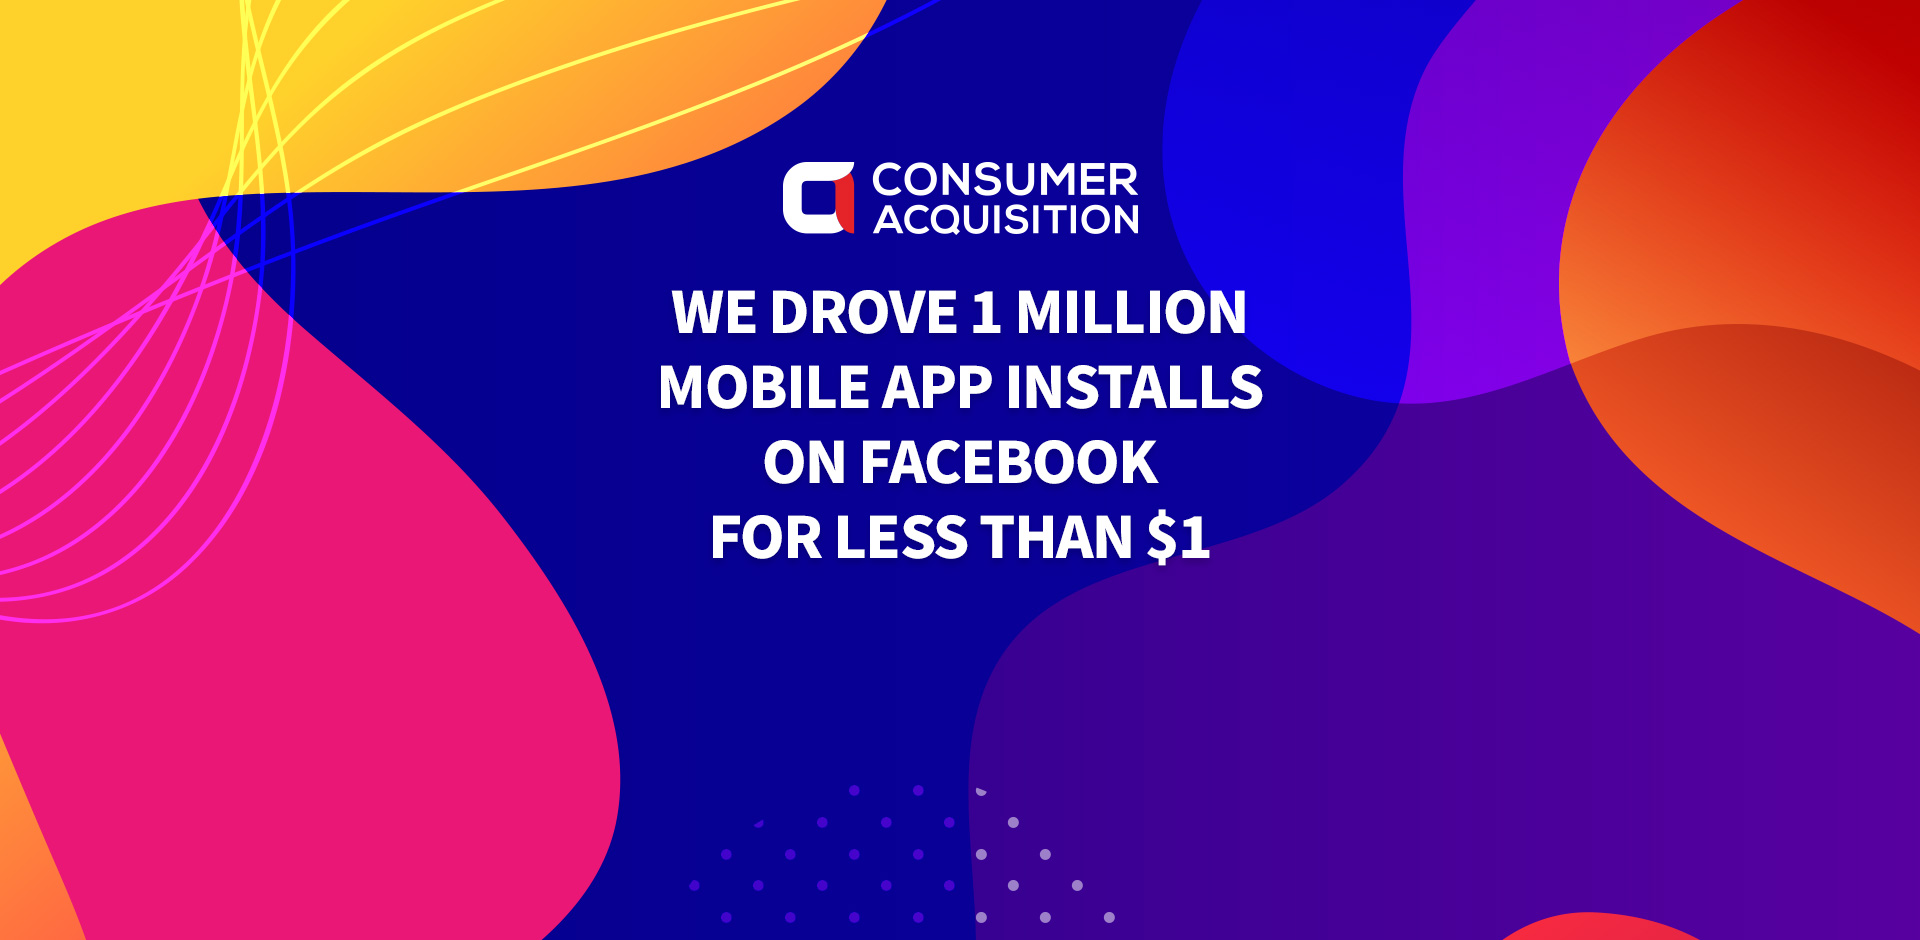 We Drove 1 Million Mobile App Installs on Facebook for Less Than $1